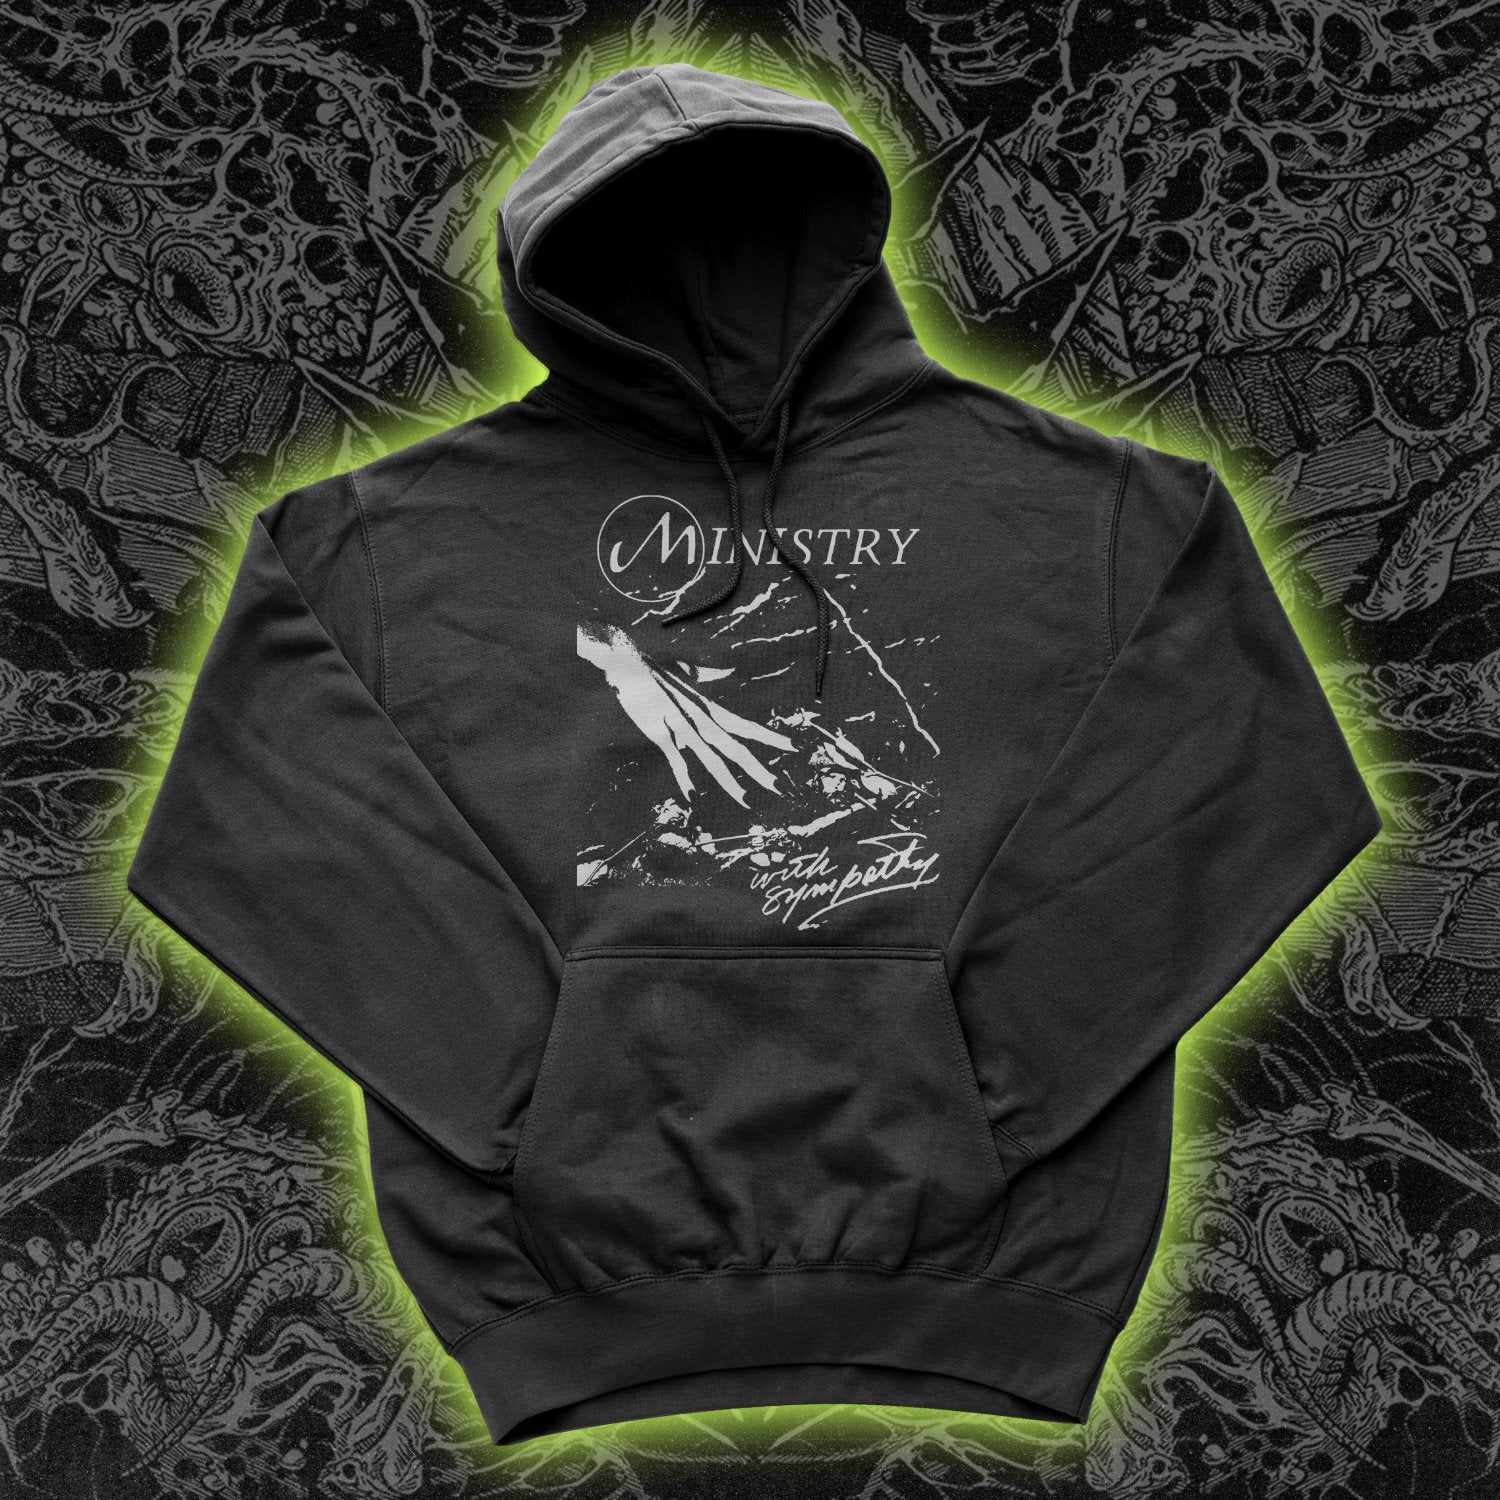 Ministry With Sympathy Hoodie